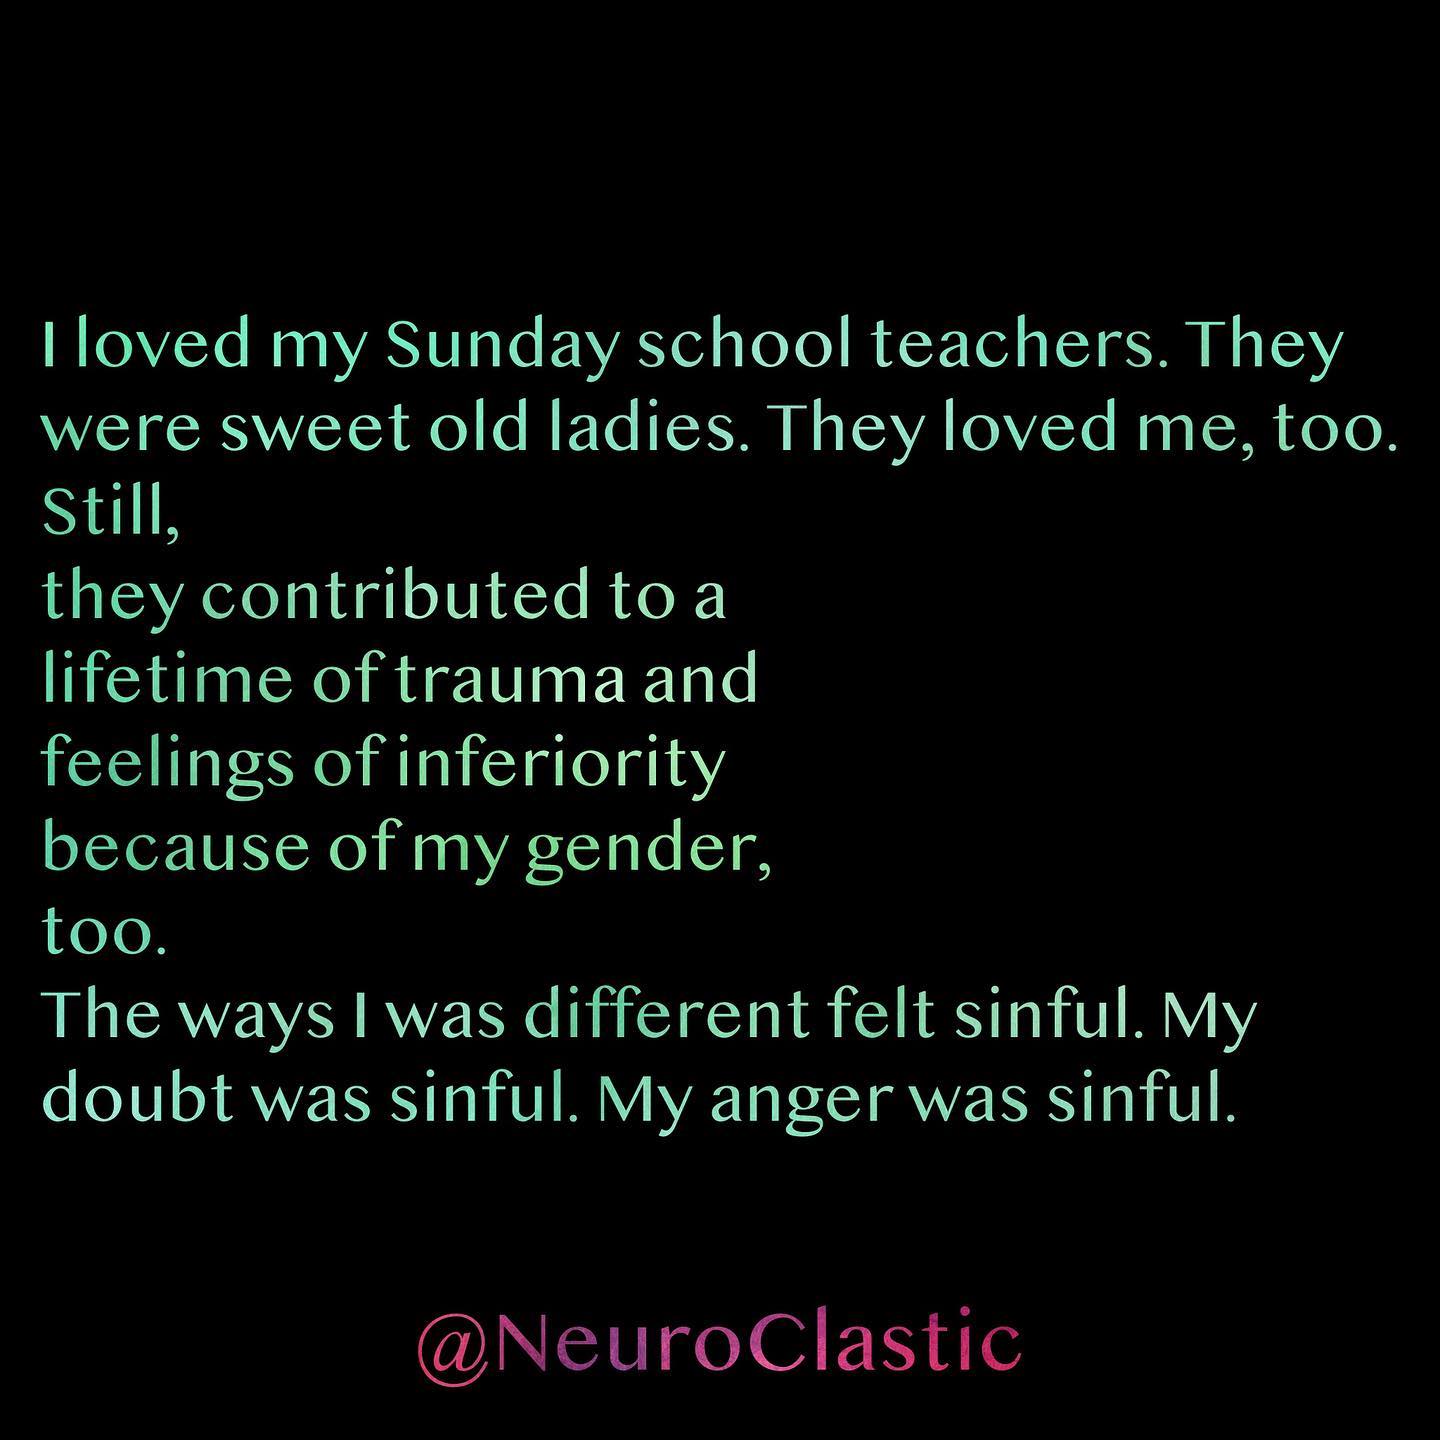 I loved my Sunday school teachers. They were sweet old ladies. They loved me, too. Still, they contributed to a lifetime of trauma and feelings of inferiority because of my gender, too. The ways I was different felt sinful. My doubt was sinful. My anger was sinful. @NeuroClastic